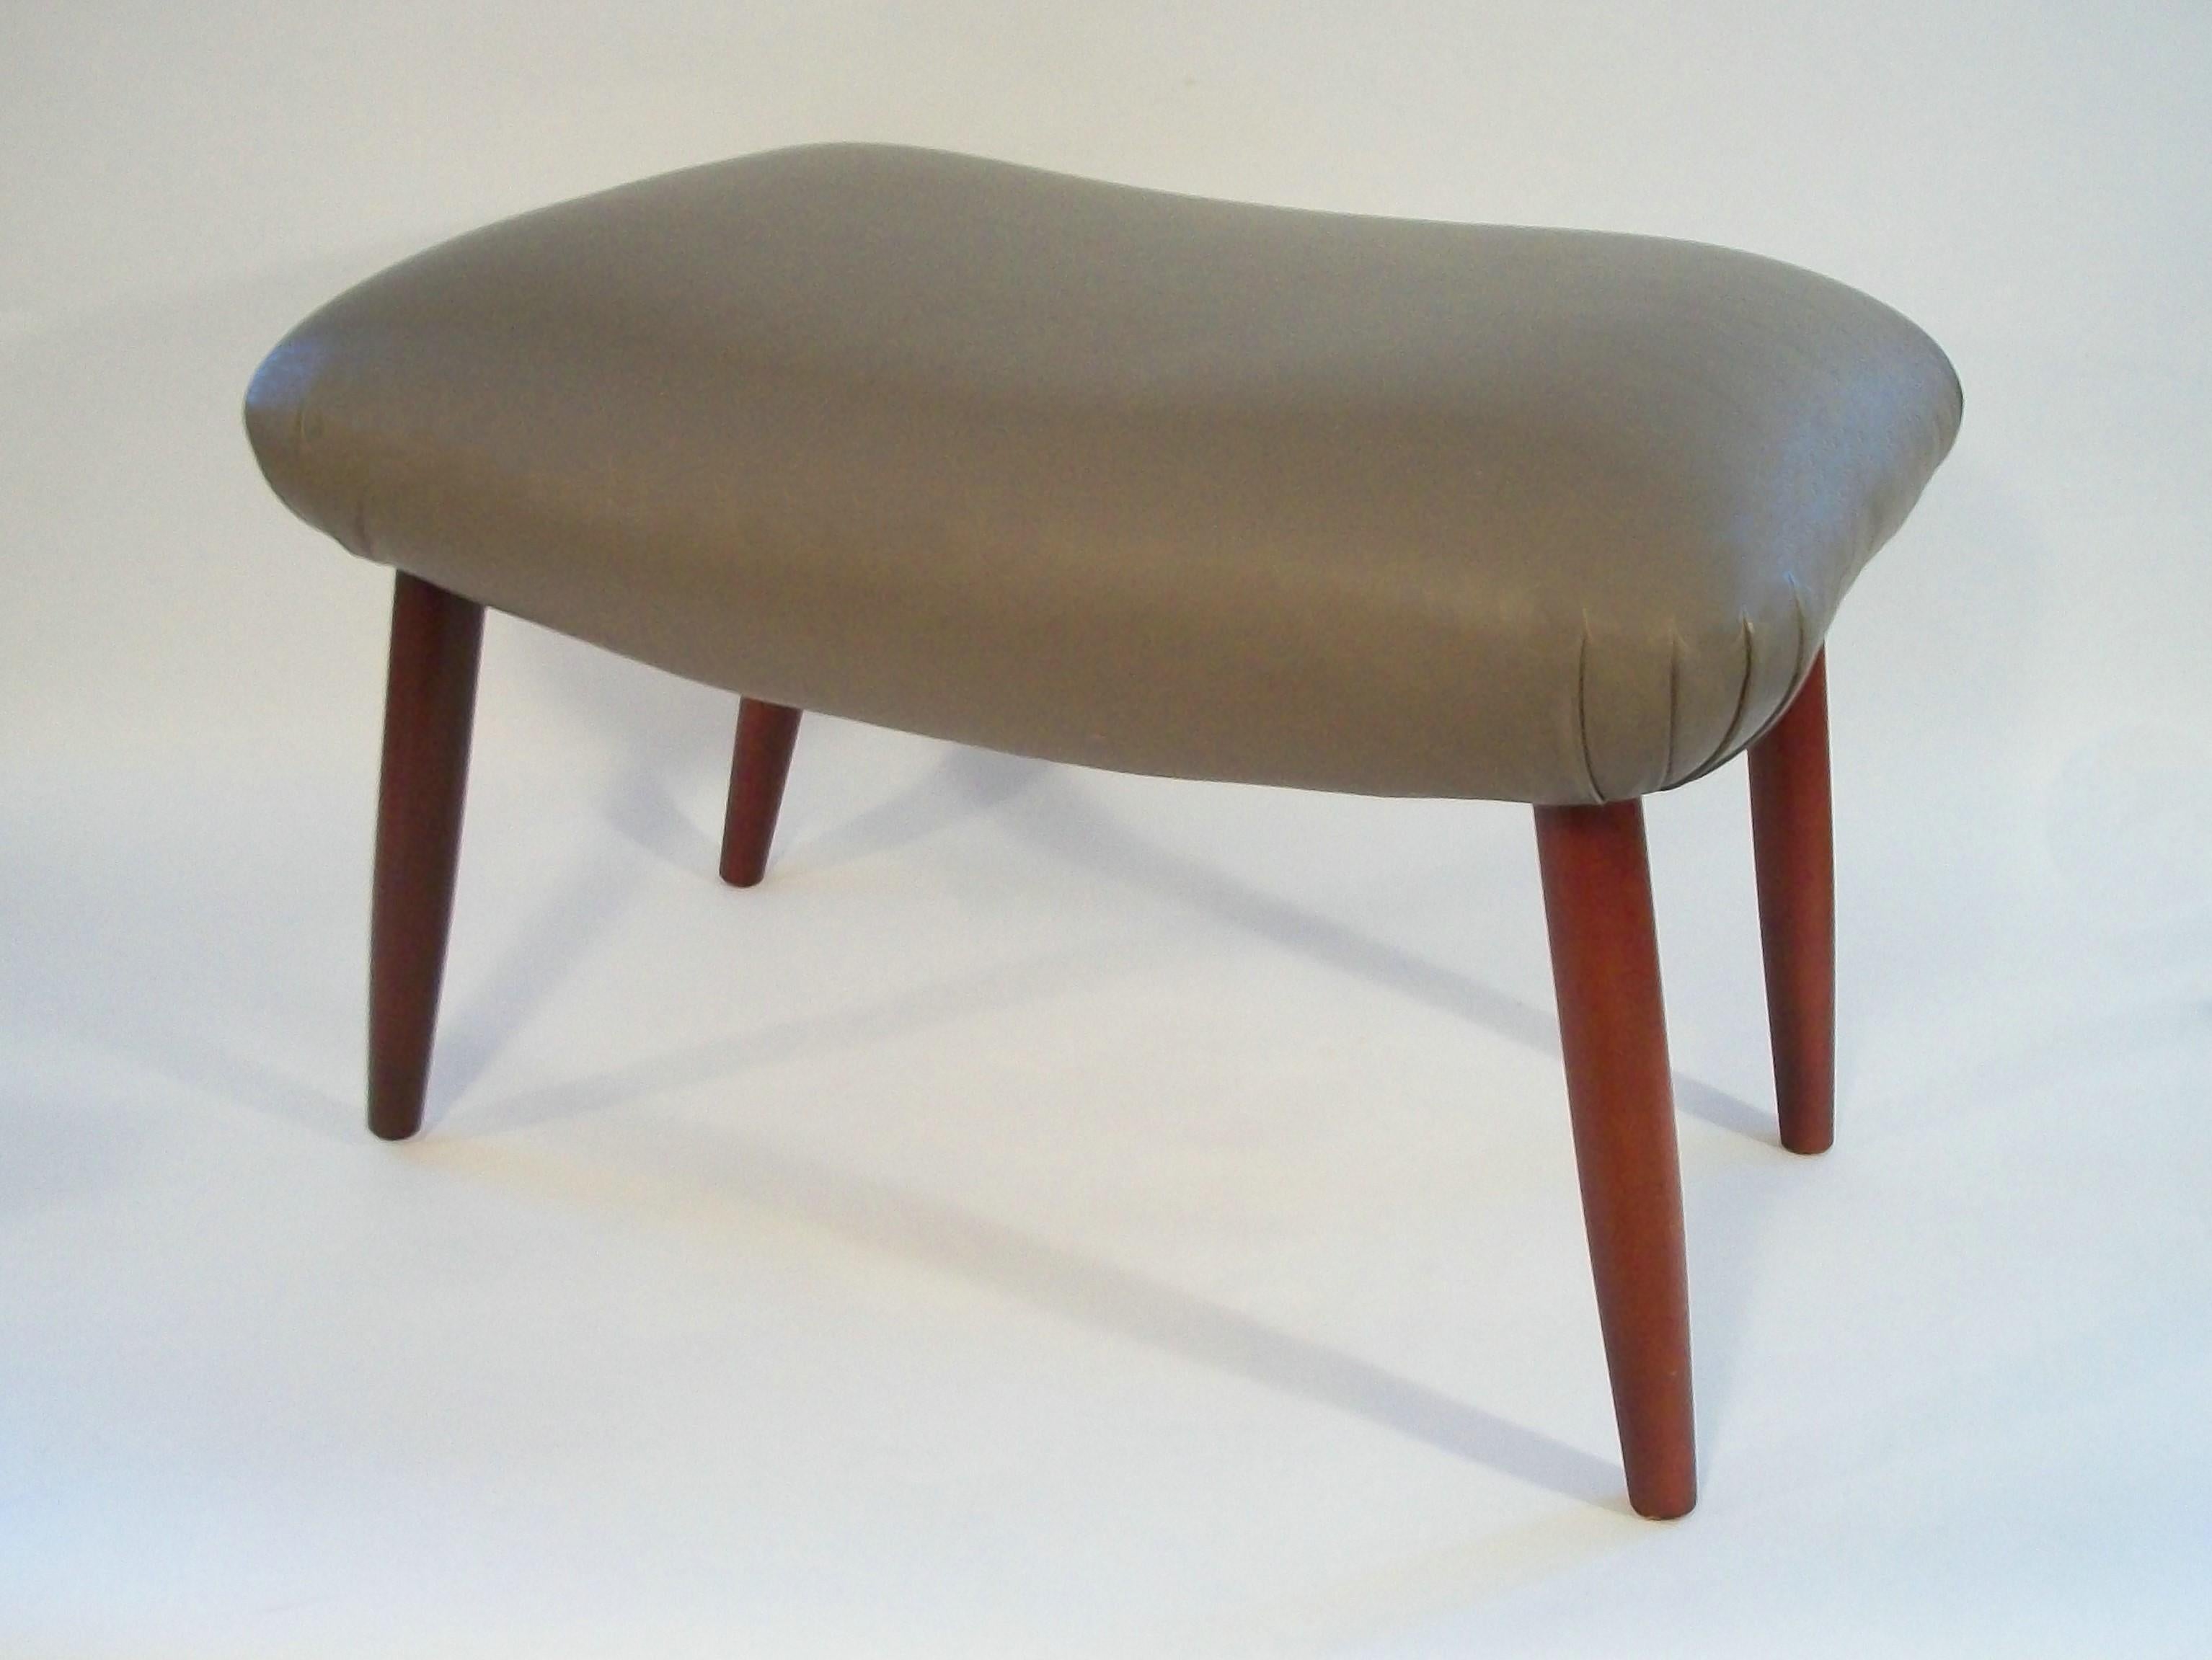 Hand-Crafted Mid Century Saddle Seat Foot Stool / Ottoman - Leather Upholstery - Circa 1980's For Sale